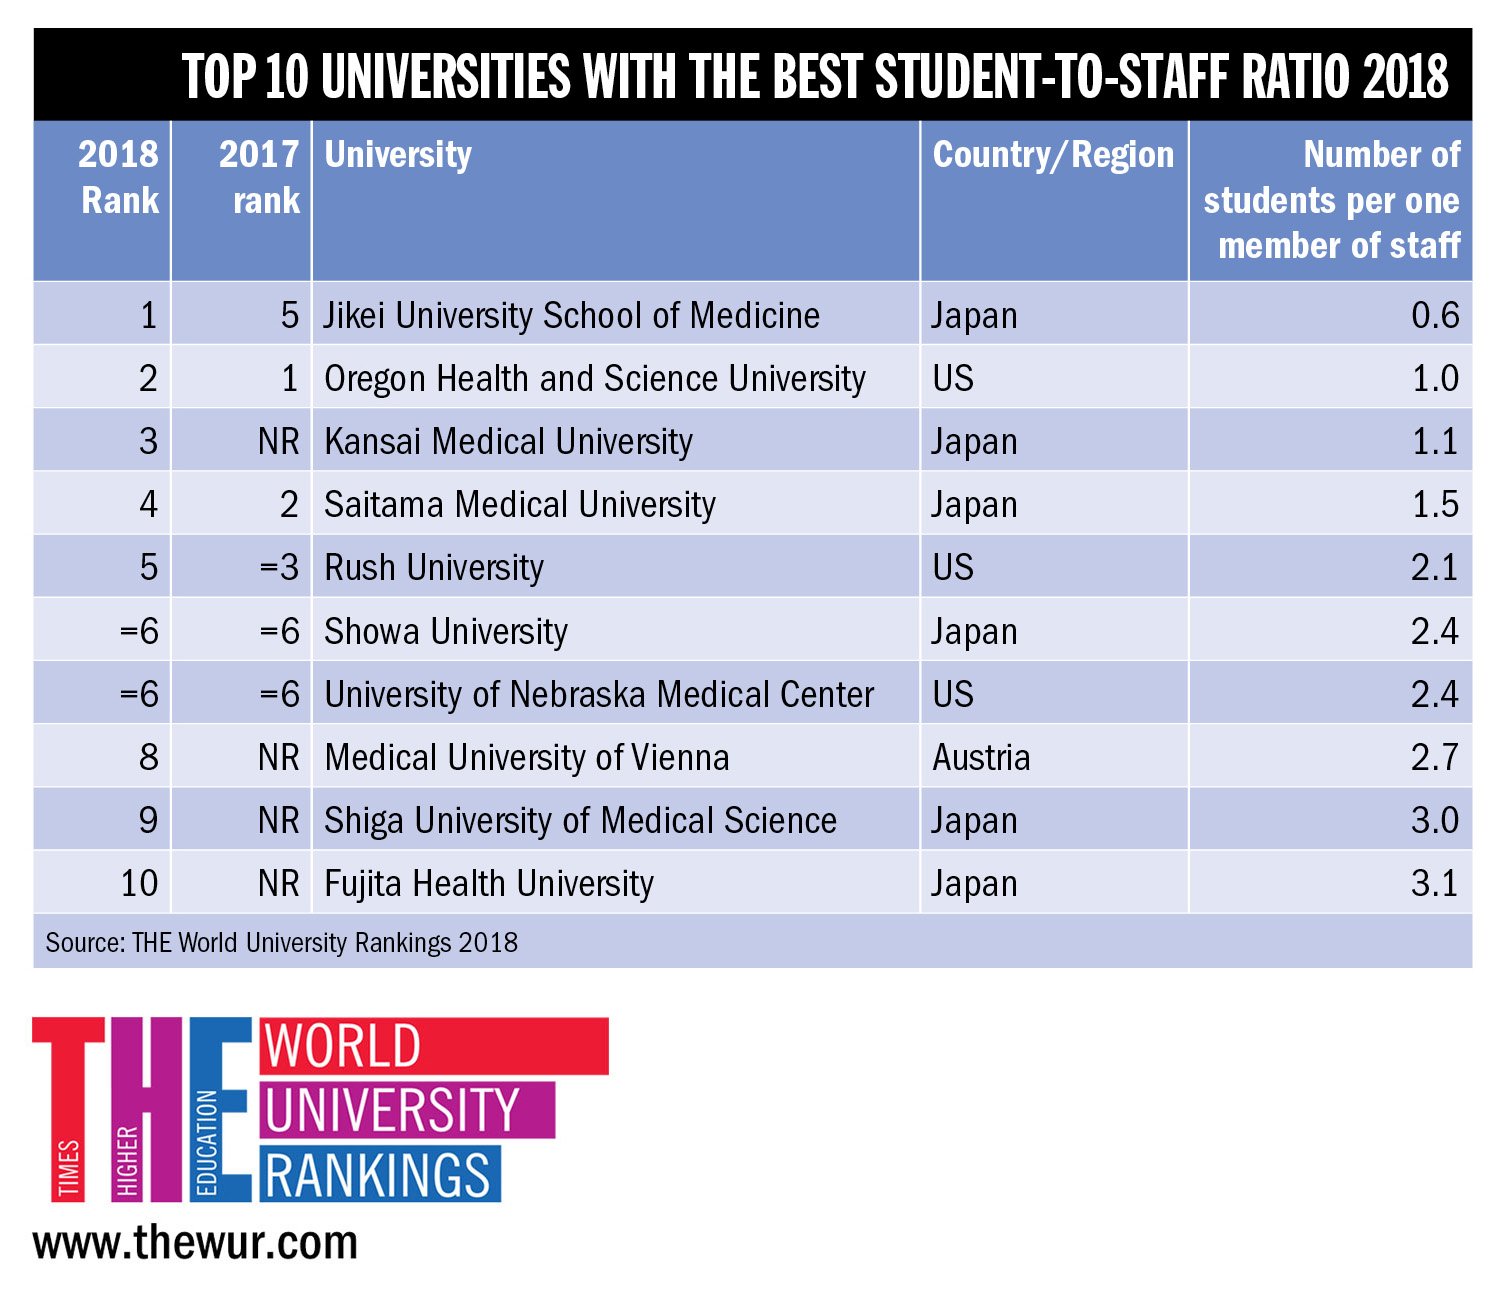 Rankings on "Top universities with the best student-to-staff ratio 2018 https://t.co/cv1qJk0lXg #THEunirankings https://t.co/qttI8ibvio" / Twitter